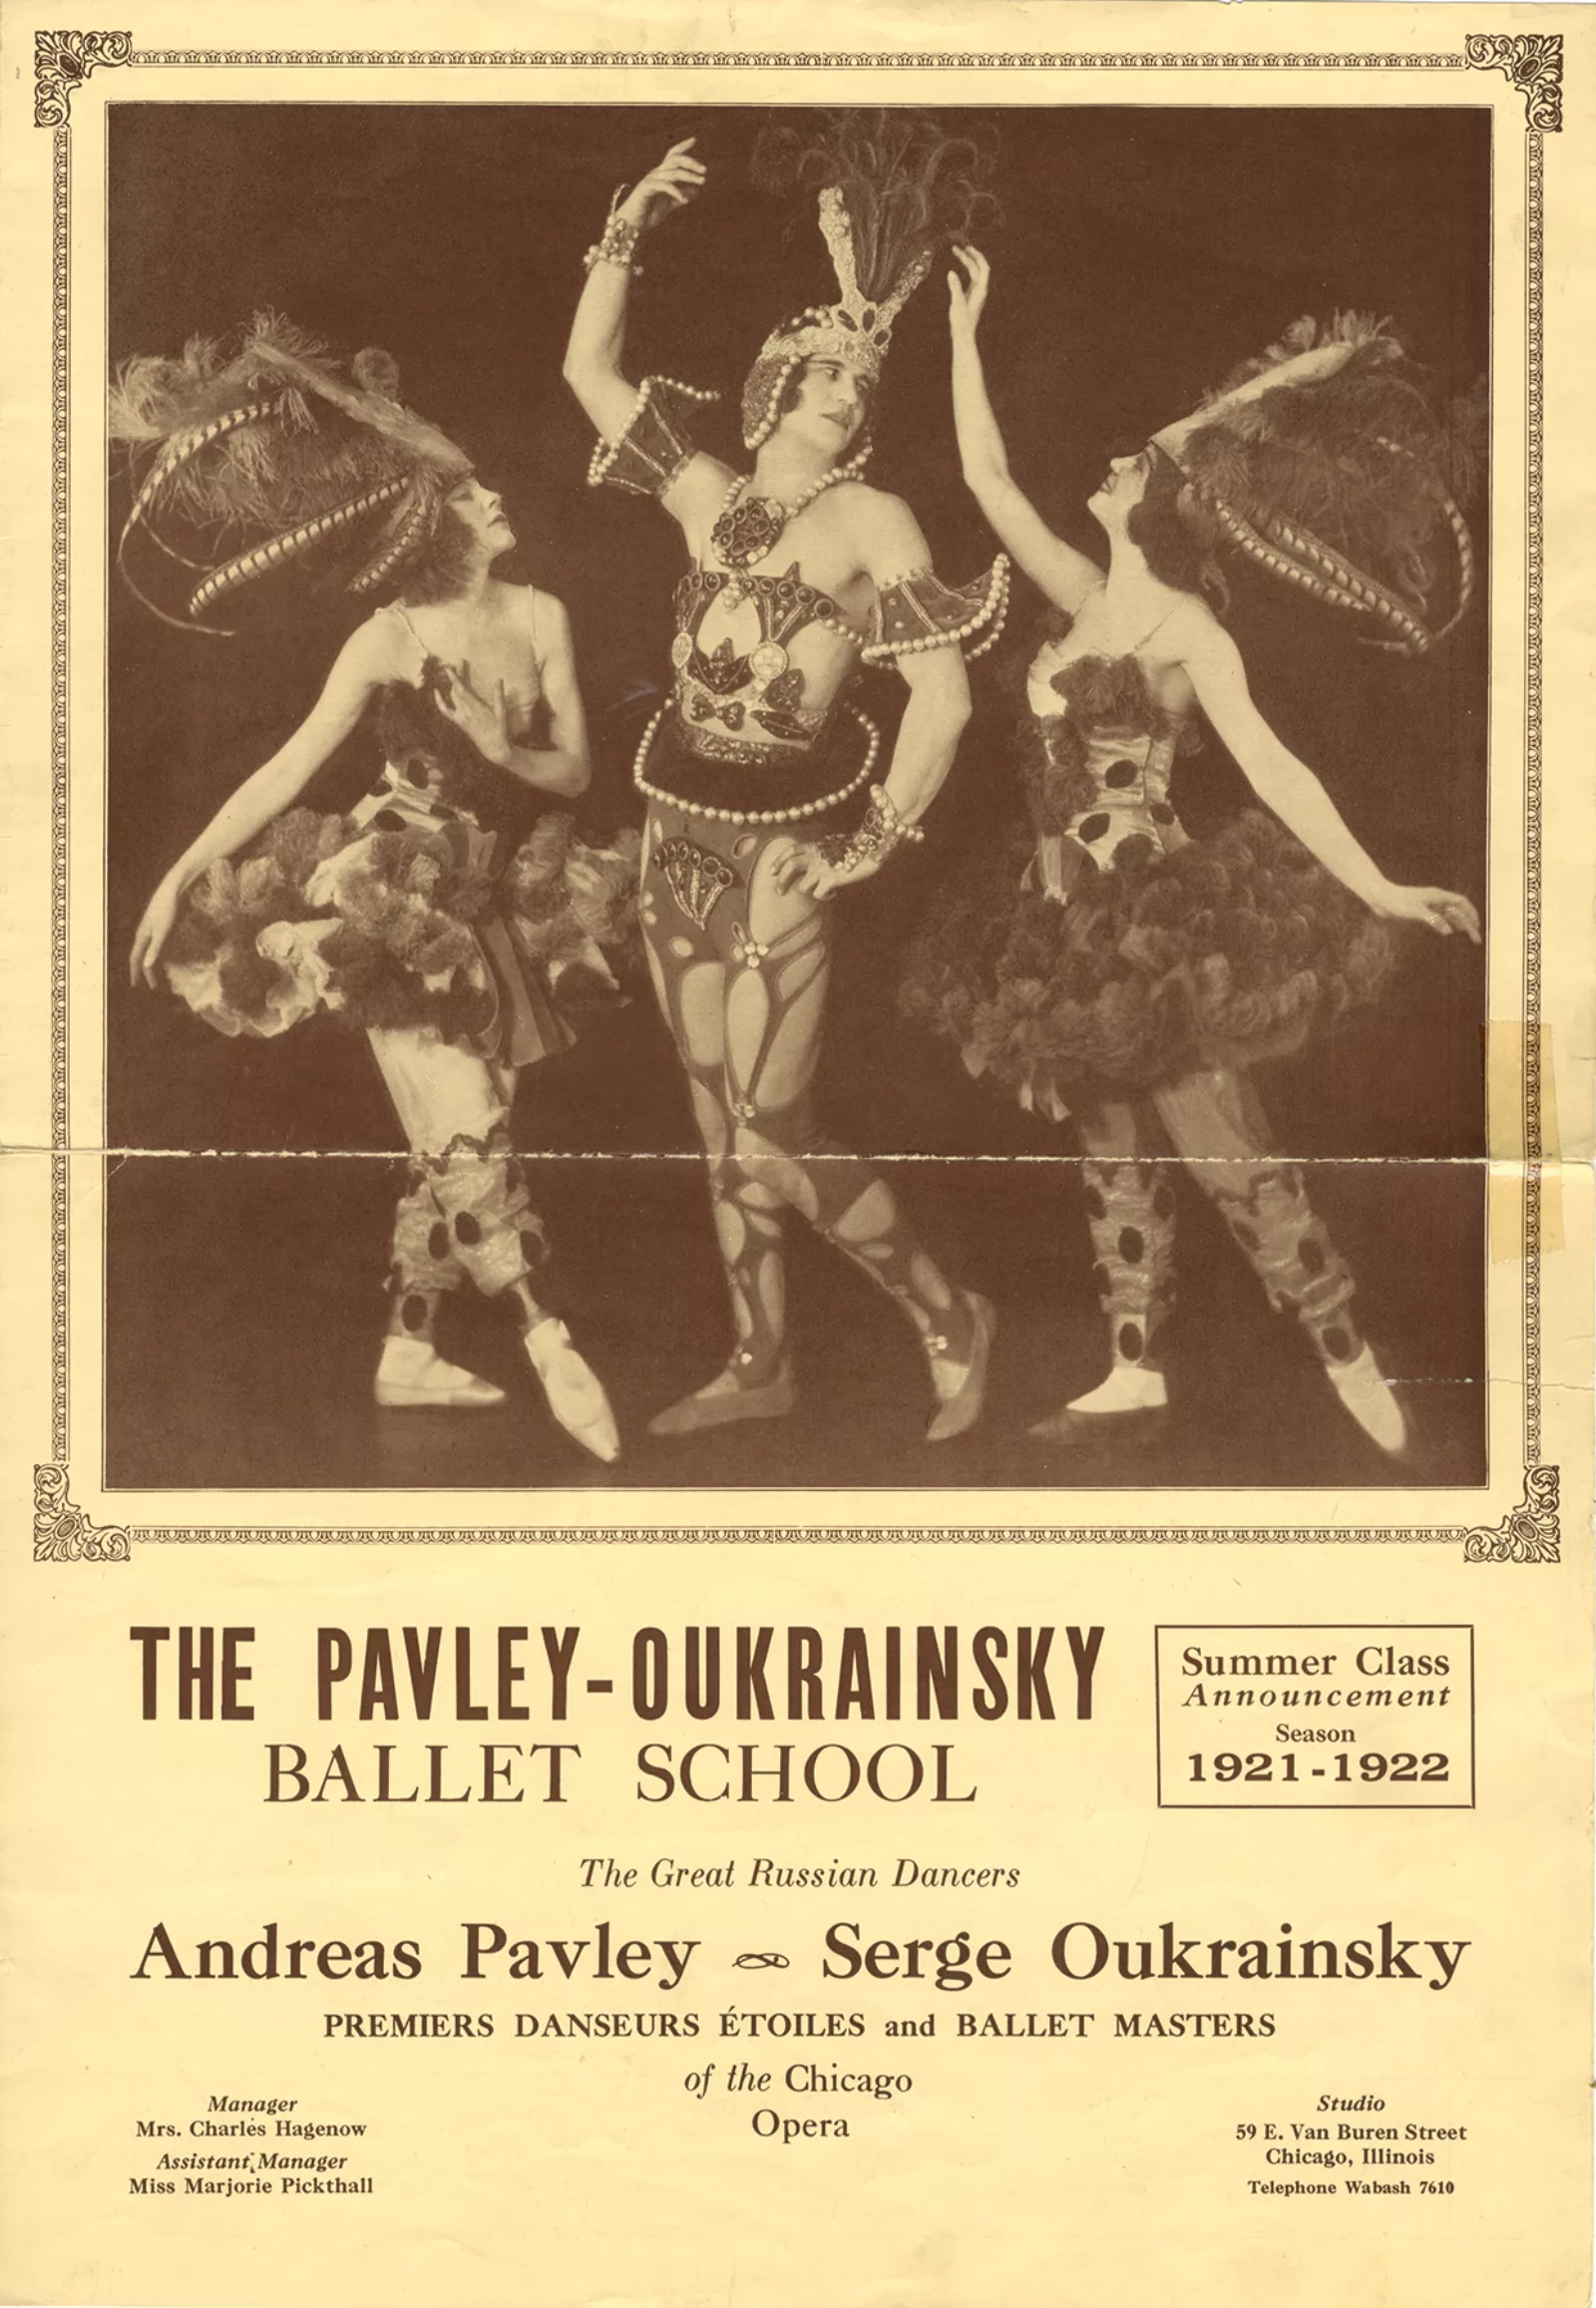 Promotional poster for the Pavley-Oukrainsky Ballet School's new season, 1921-22. From the Newberry's Ann Barzel Dance Research Collection (Dance MS Barzel Research, Subject Files, Box 340)